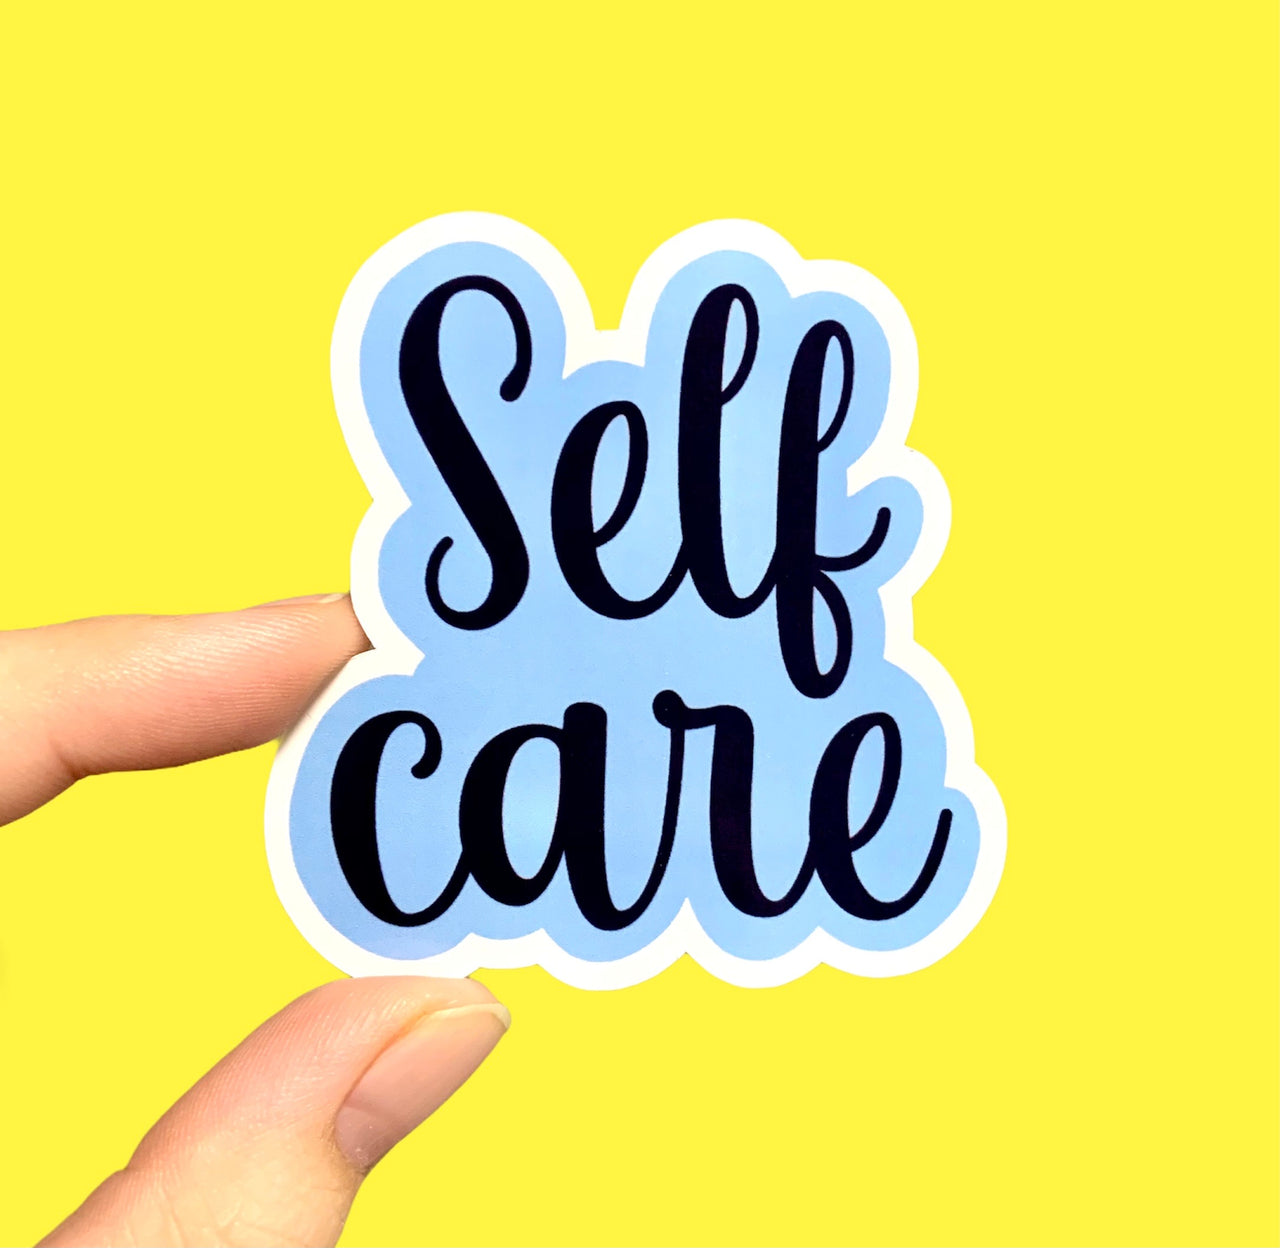 Self care (pack of 3 or 5 stickers)